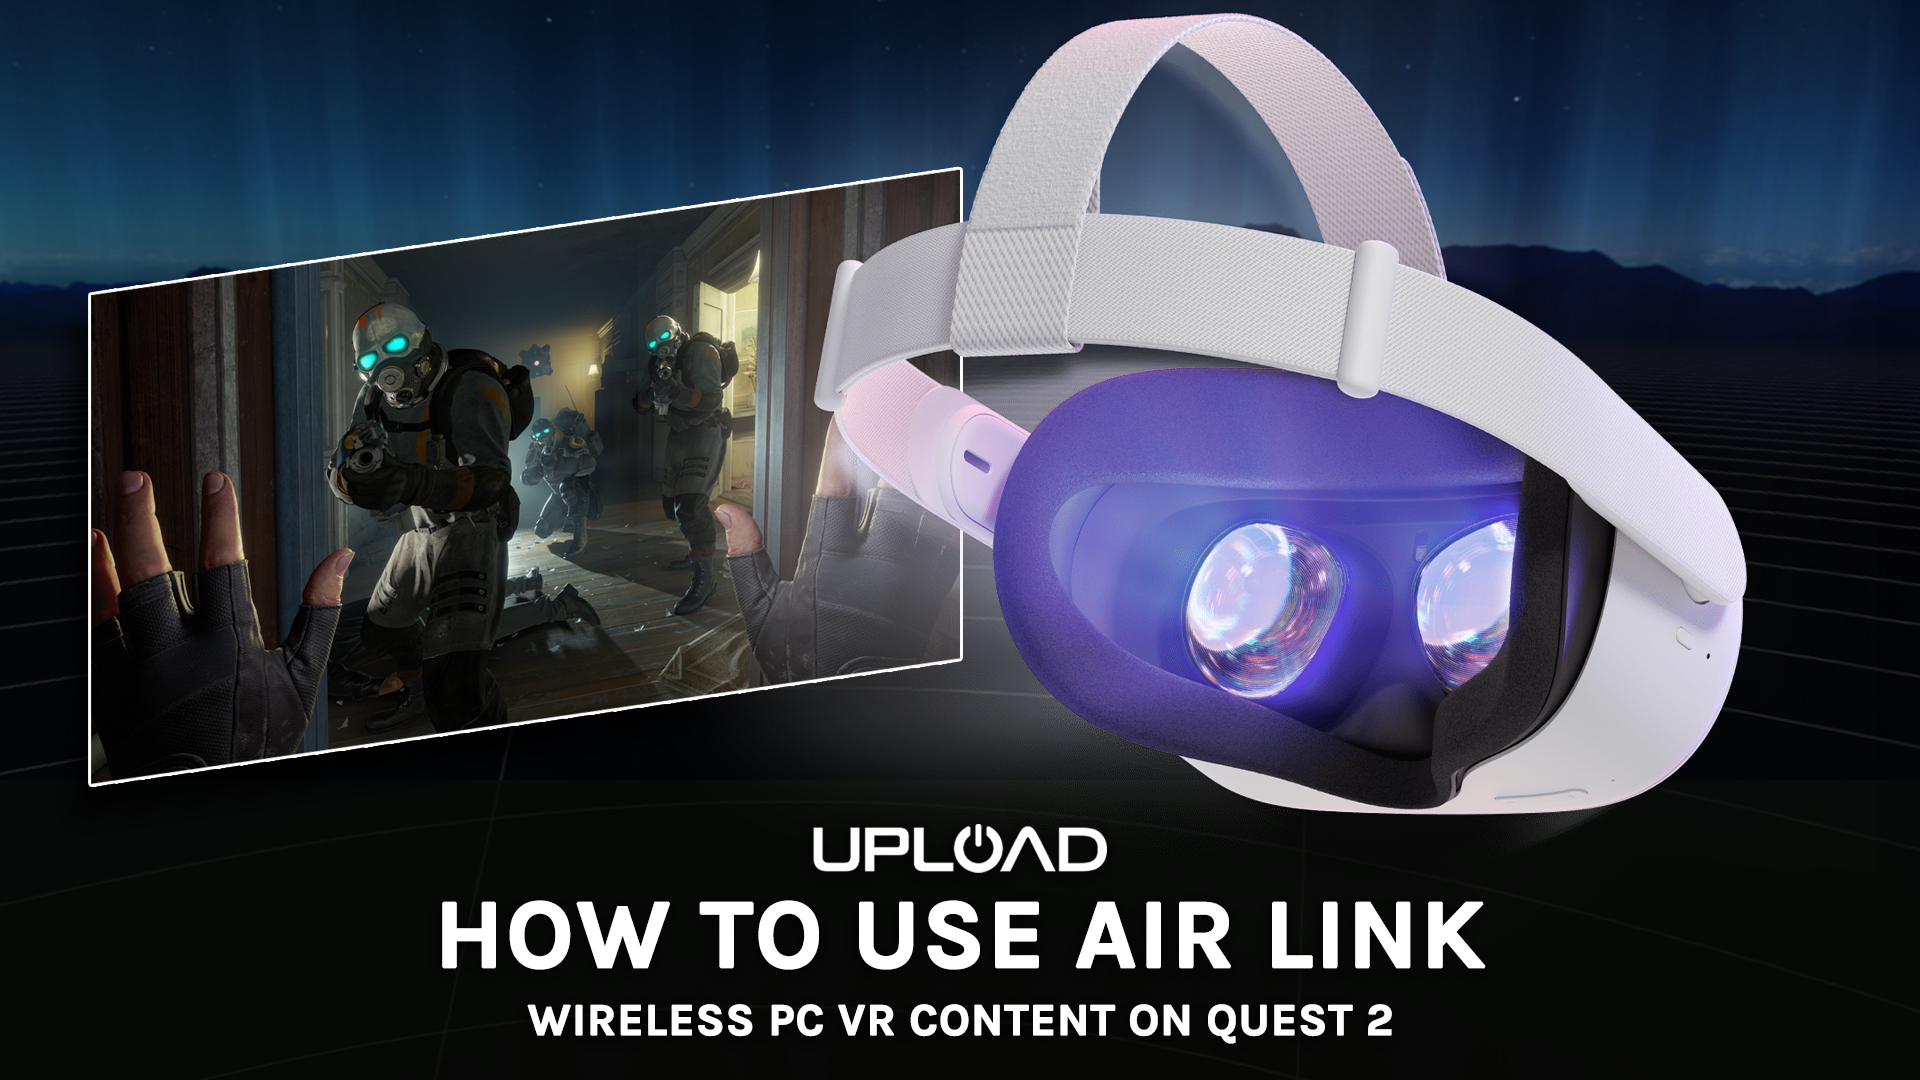 Oculus Quest 2: Play 'Half-Life: Alyx' wirelessly in 4 simple steps